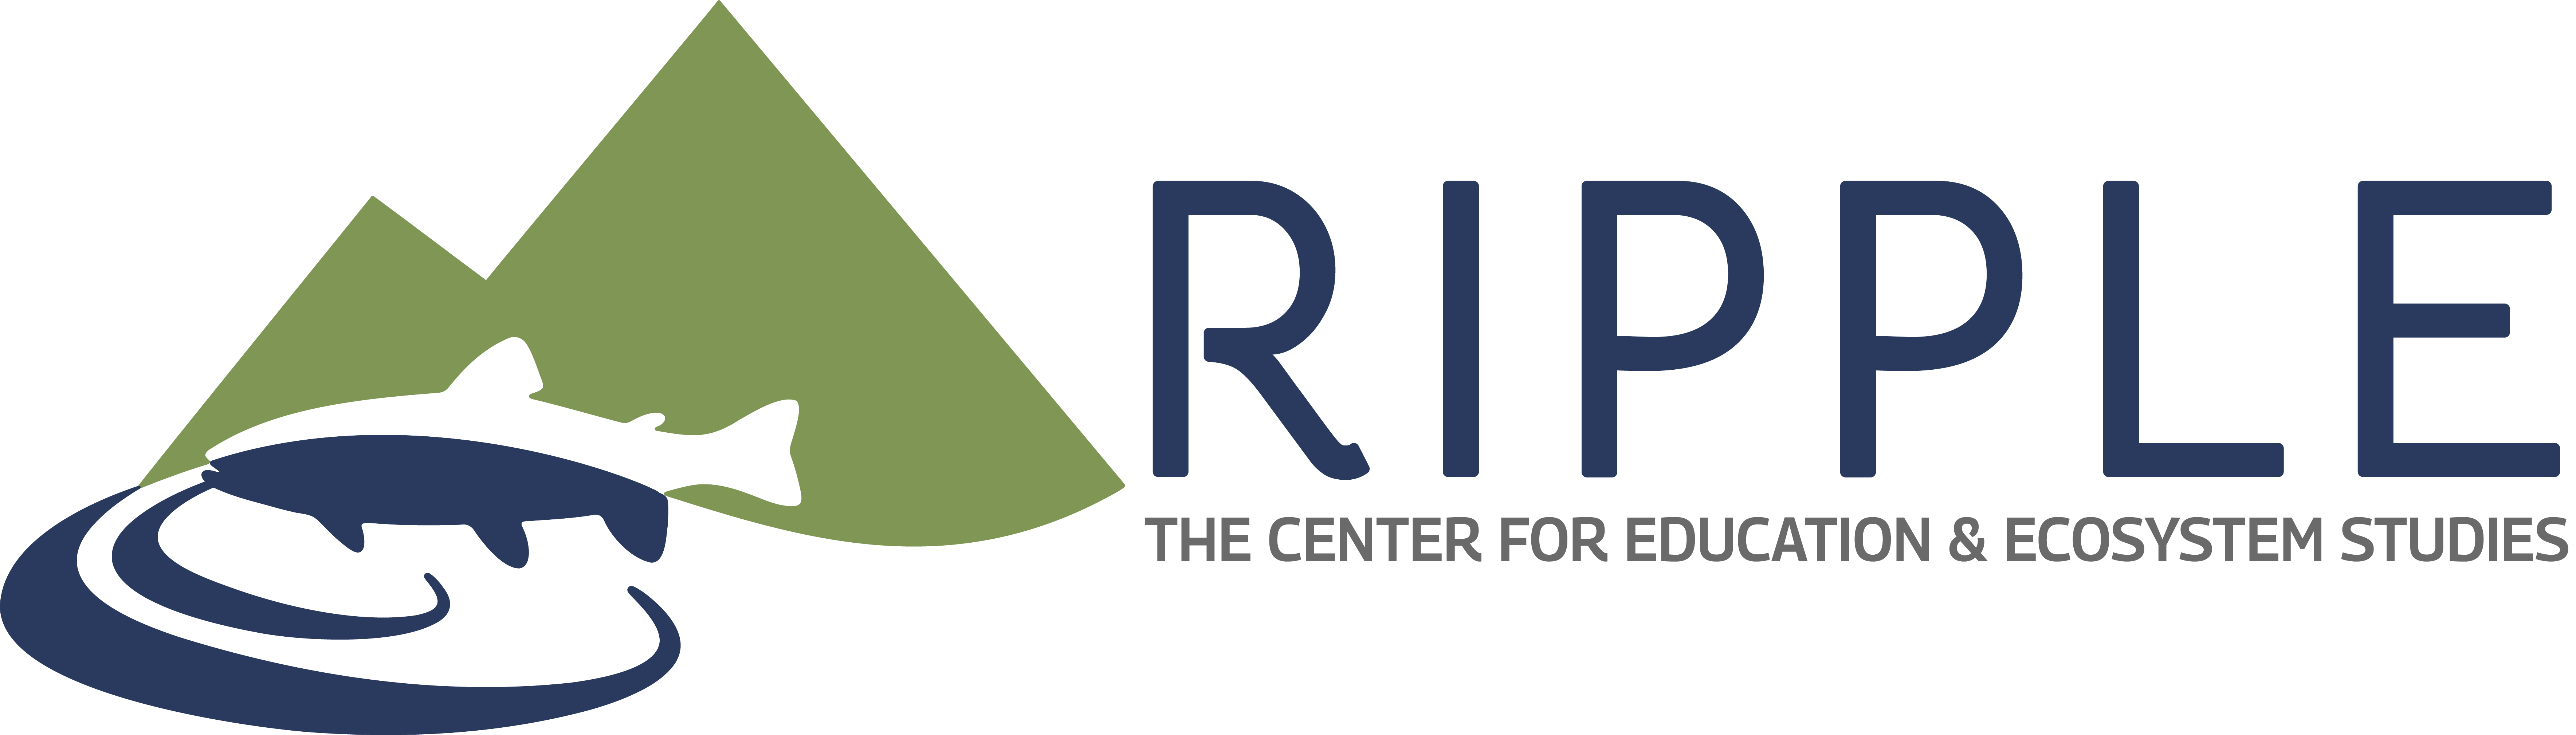 RIpple: The Center for Education & Ecosystem Studies